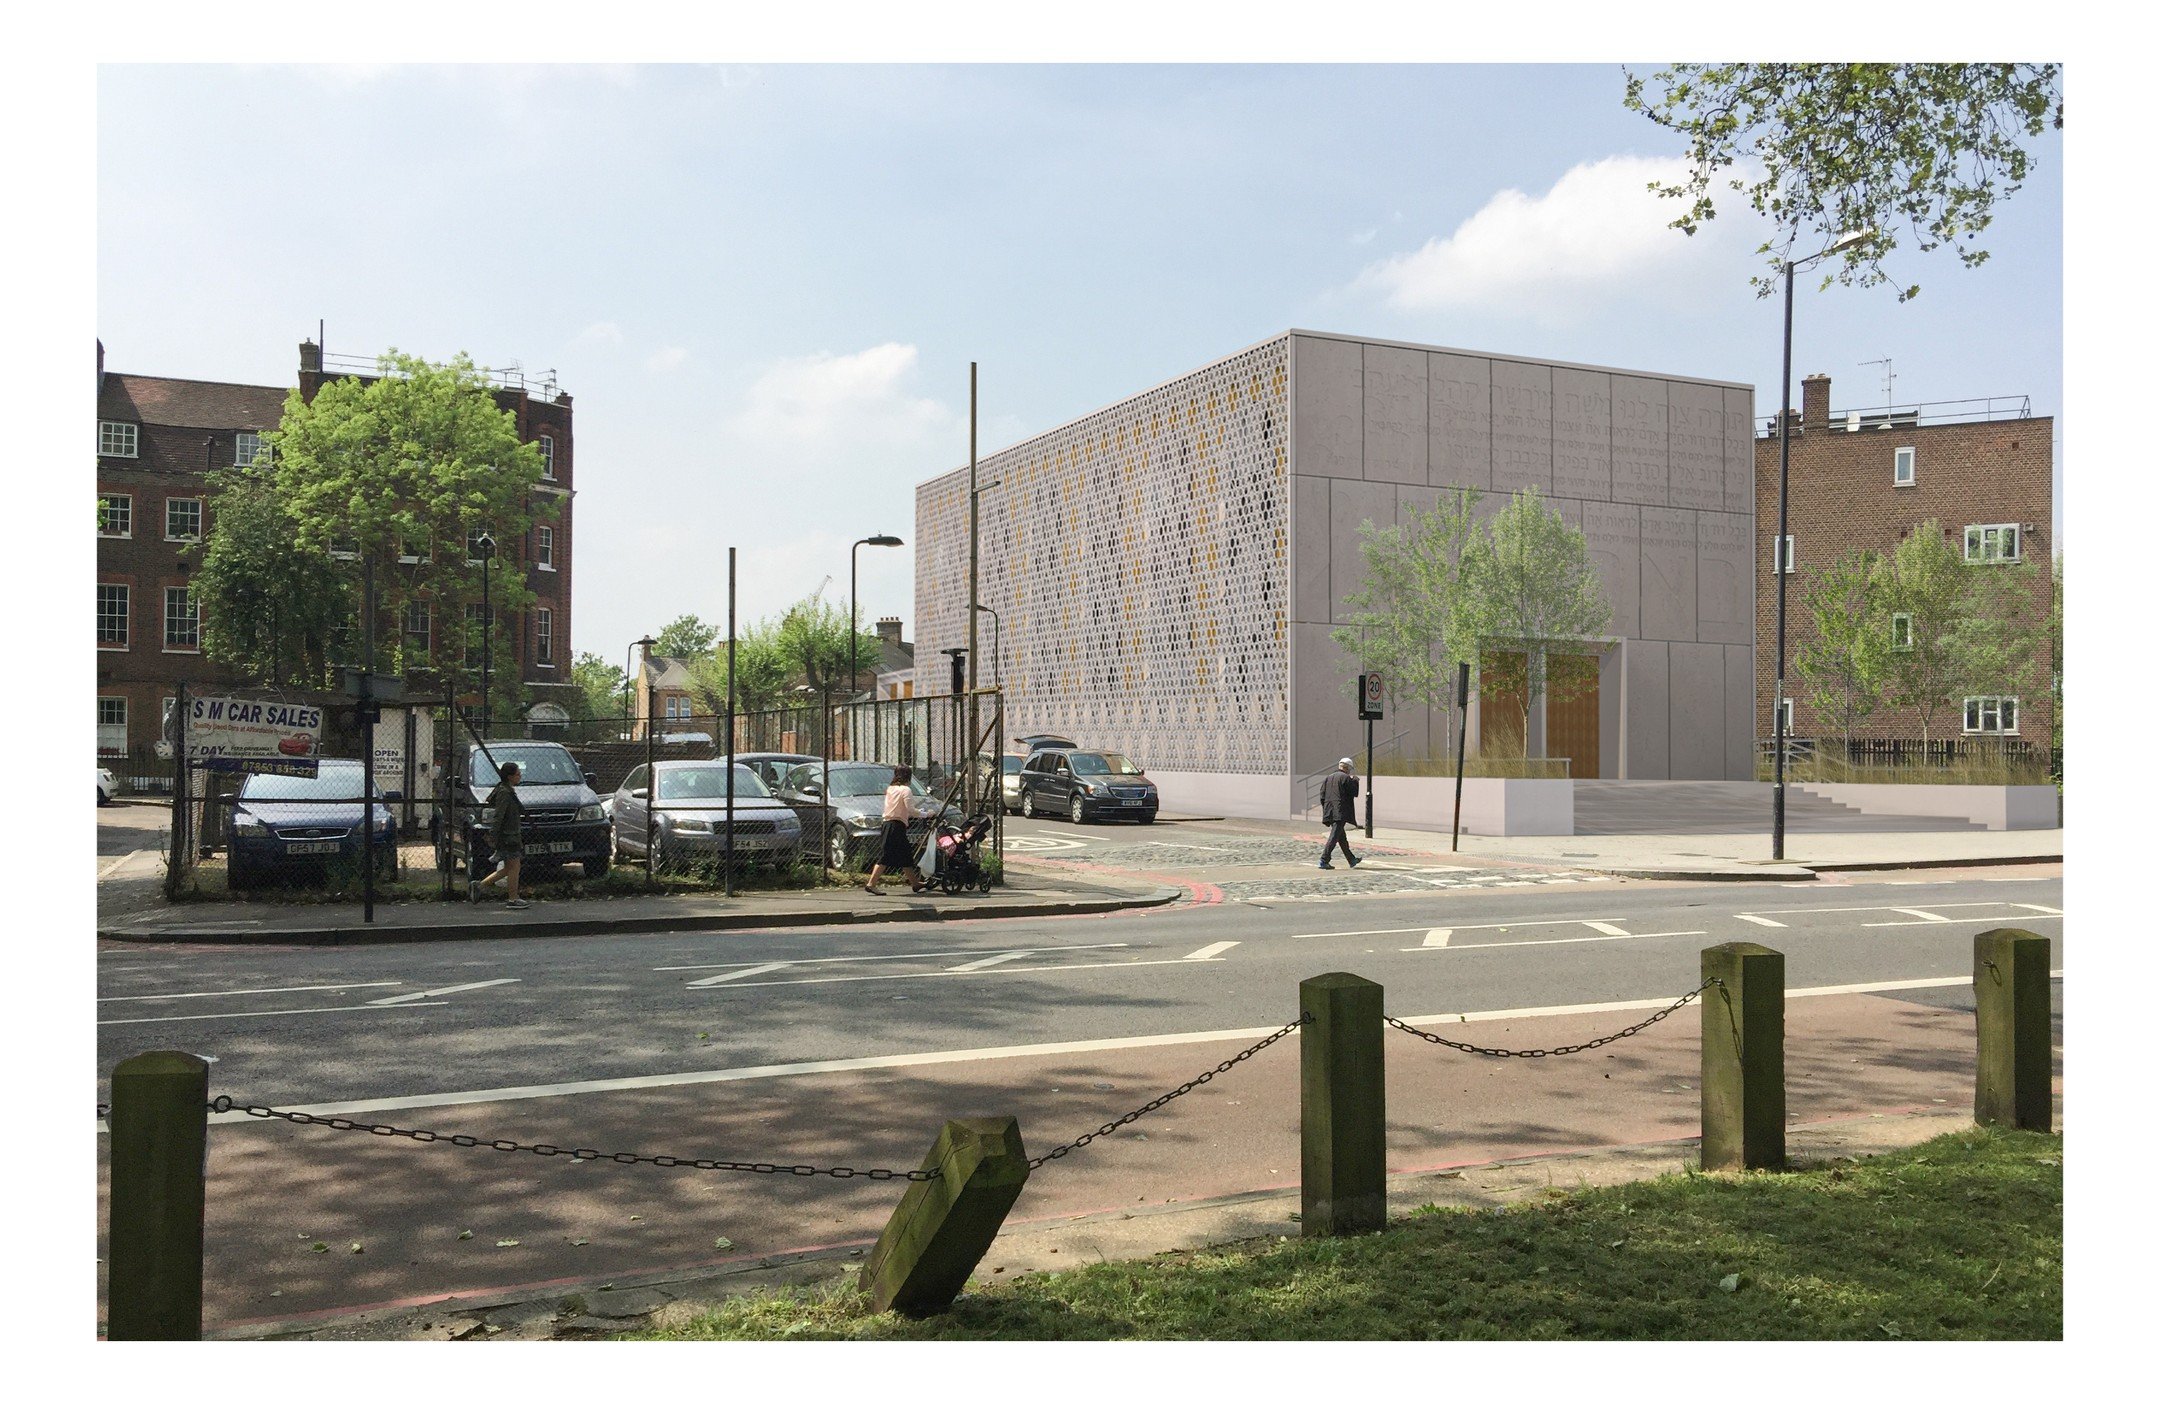 Bobov-45 Synagogue, Clapton Common, Hackney.

We are delighted to hear that Bobov-45 have finally commenced construction of their new Synagogue building. We achieved planning permission for the community back in 2018. 

The site fronts the Clapton Co